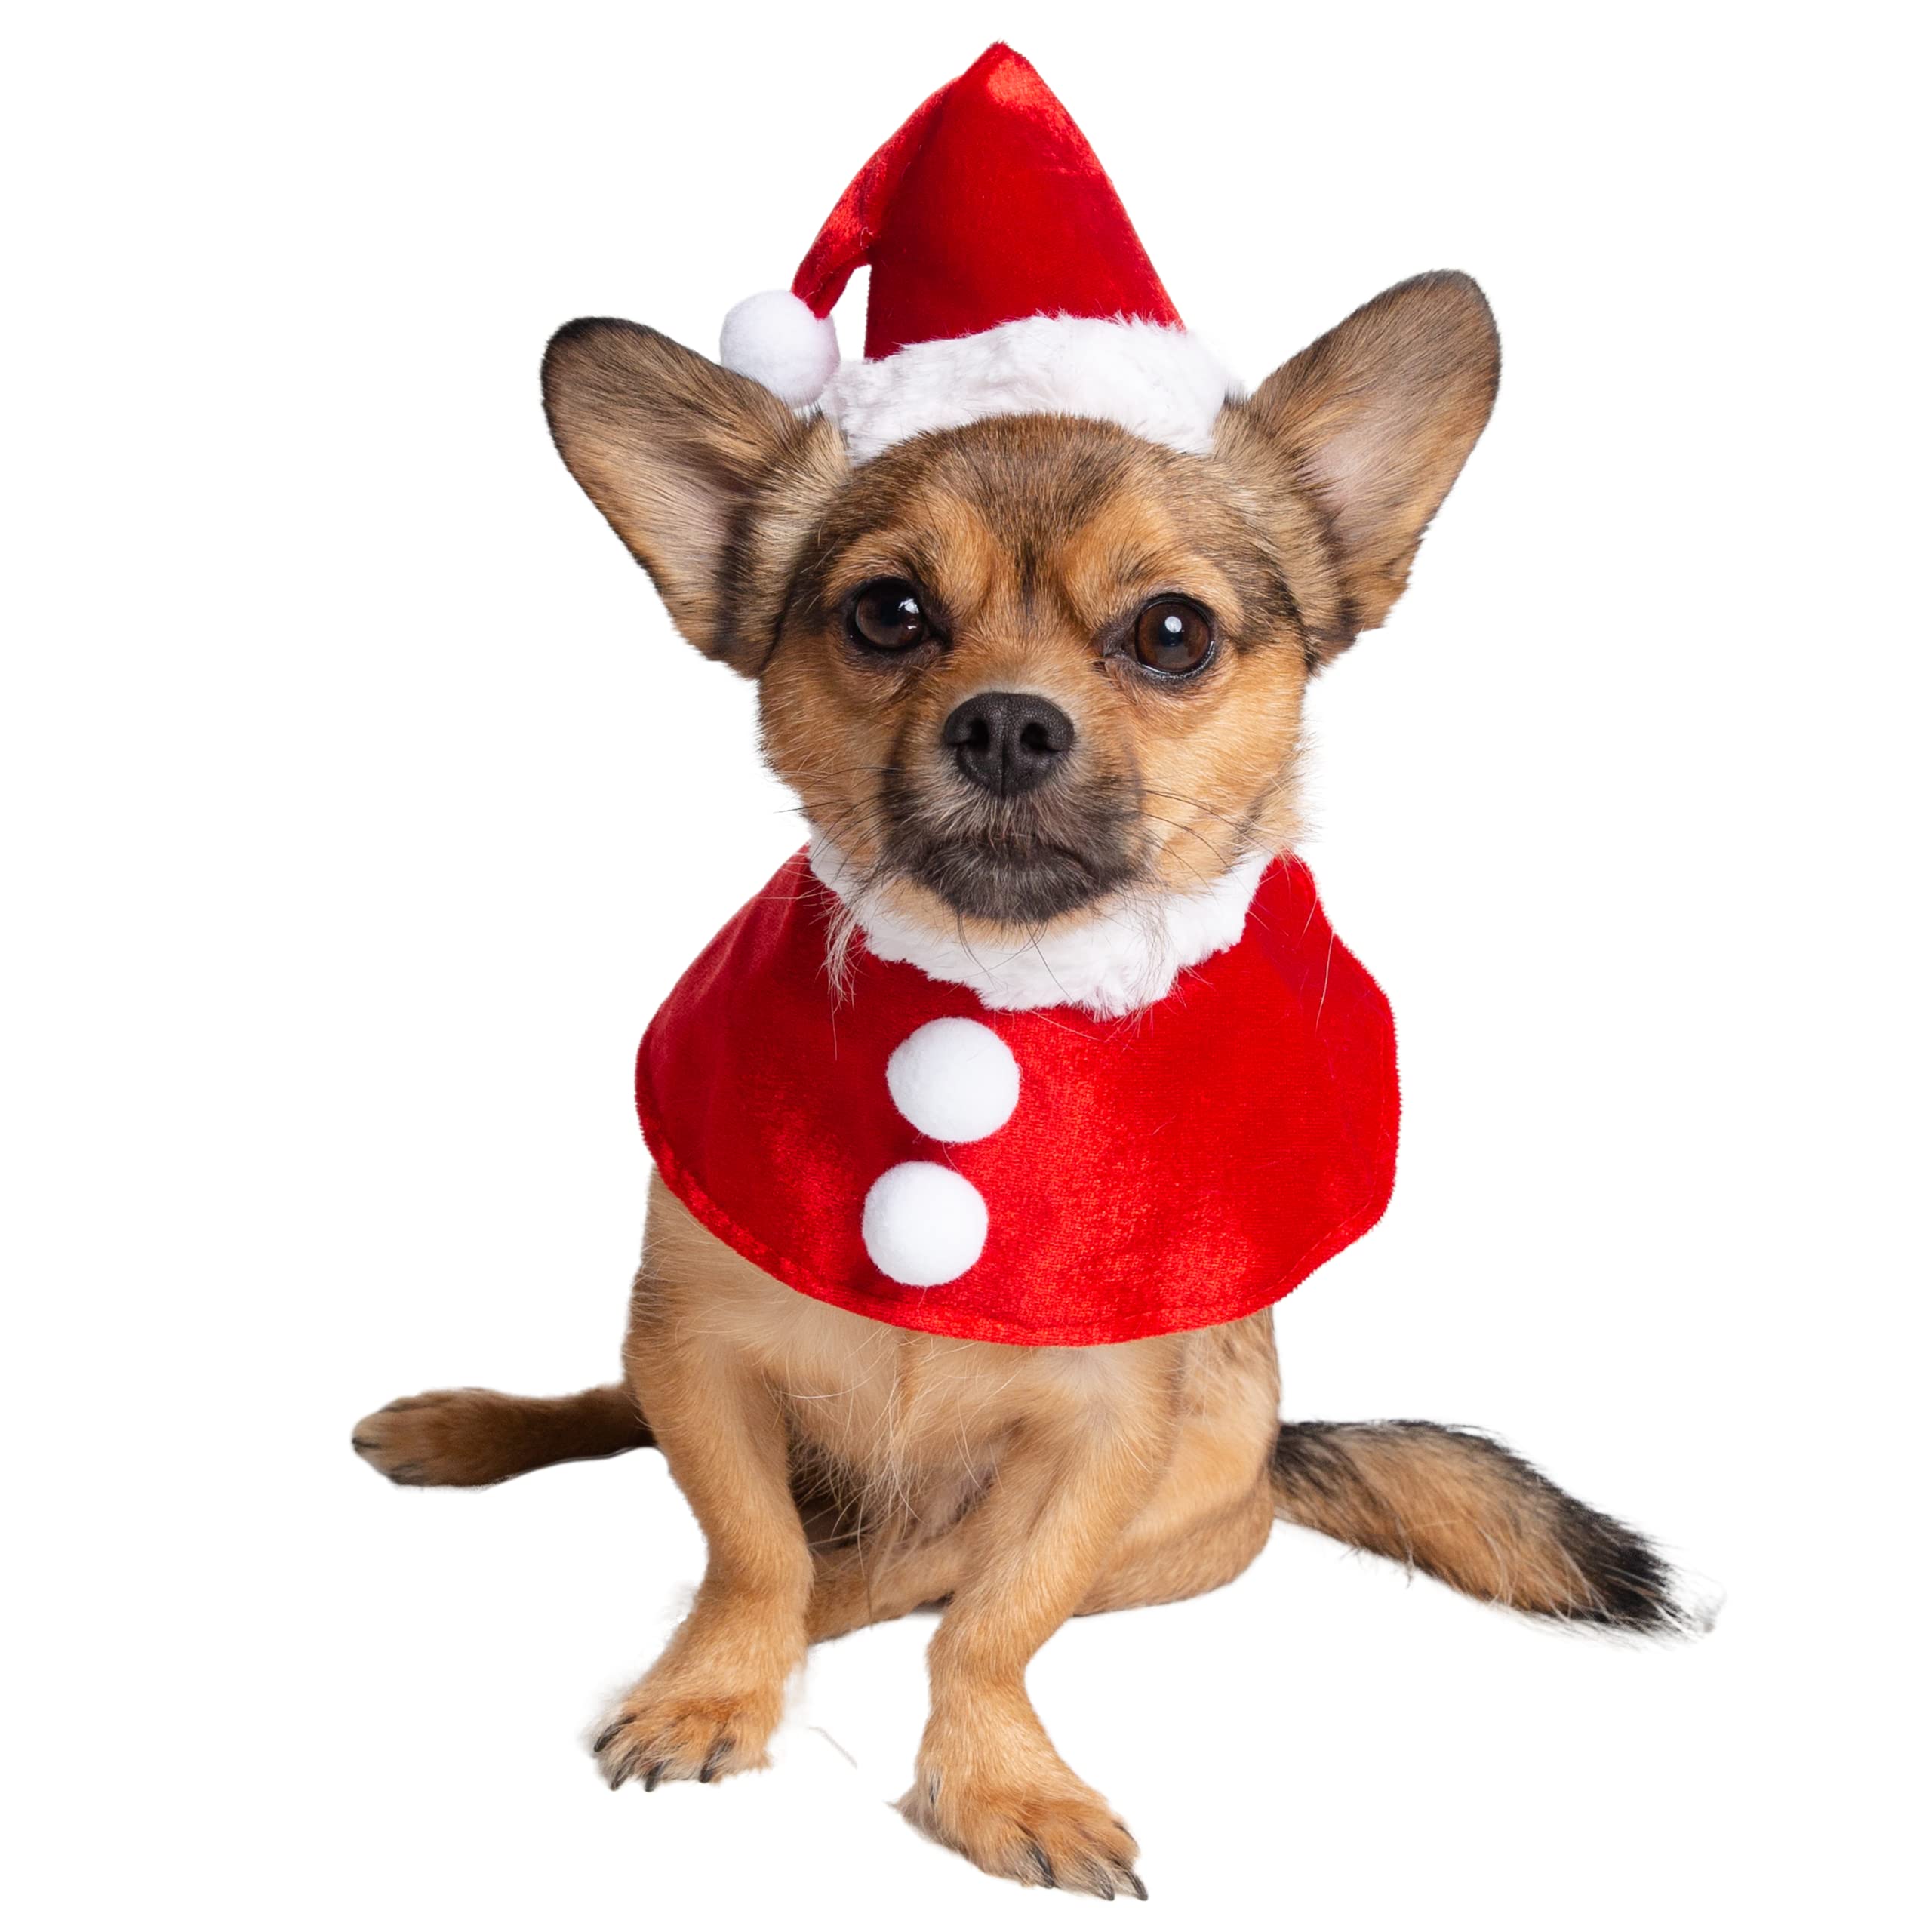 Pet Krewe Christmas Santa Dog Costume - Large Hat and Collar Set for Xmas Holiday Fun! - Perfect for Halloween, Parties, Photoshoots, Gifts for Dog Lovers  - Like New